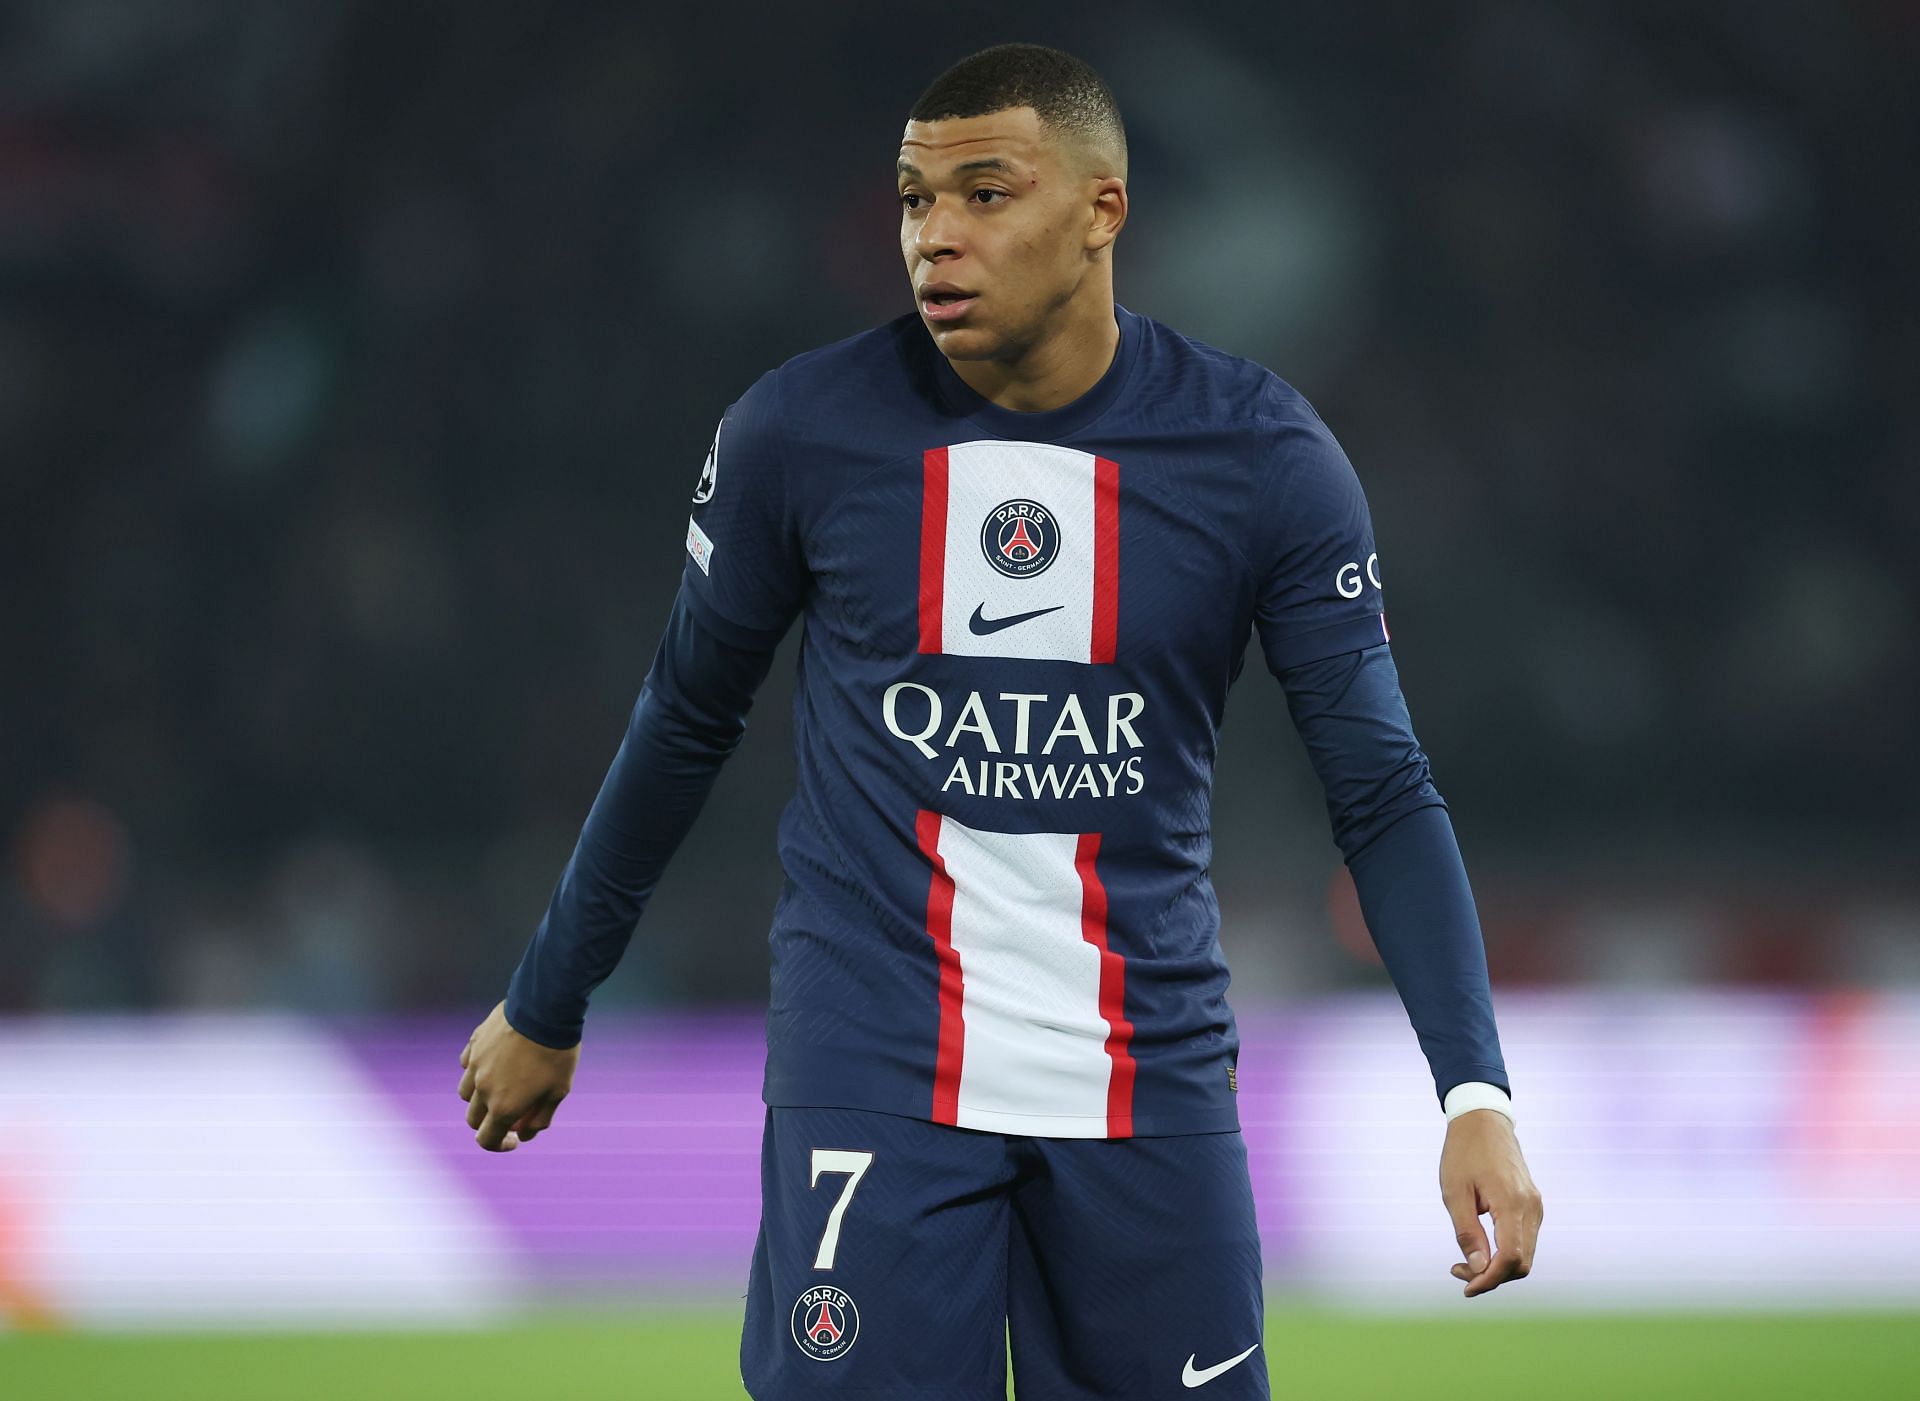 Kylian Mbappe may leave PSG to join Real Madrid